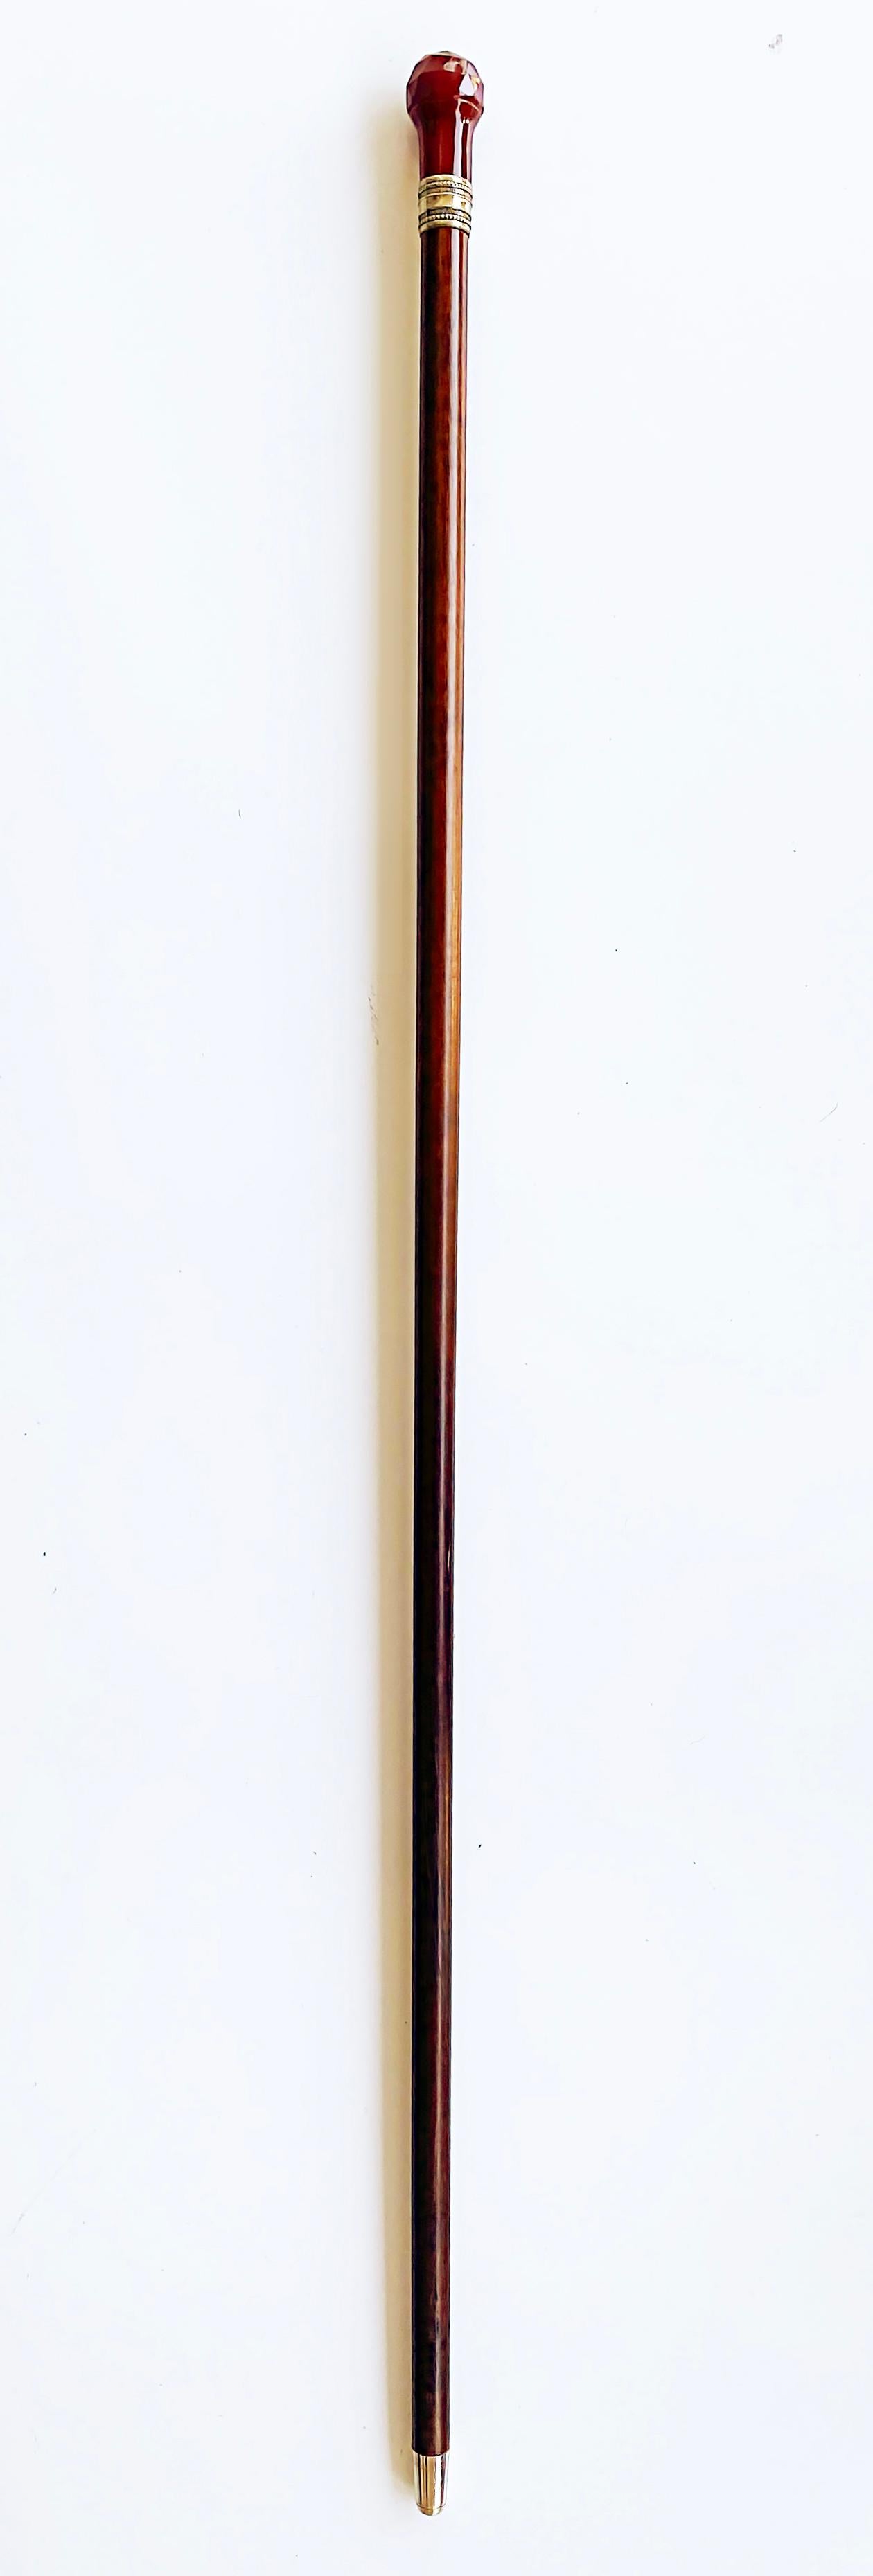 Antique Faceted Carnelian and Silver Banded Walking Stick Cane In Good Condition For Sale In Miami, FL